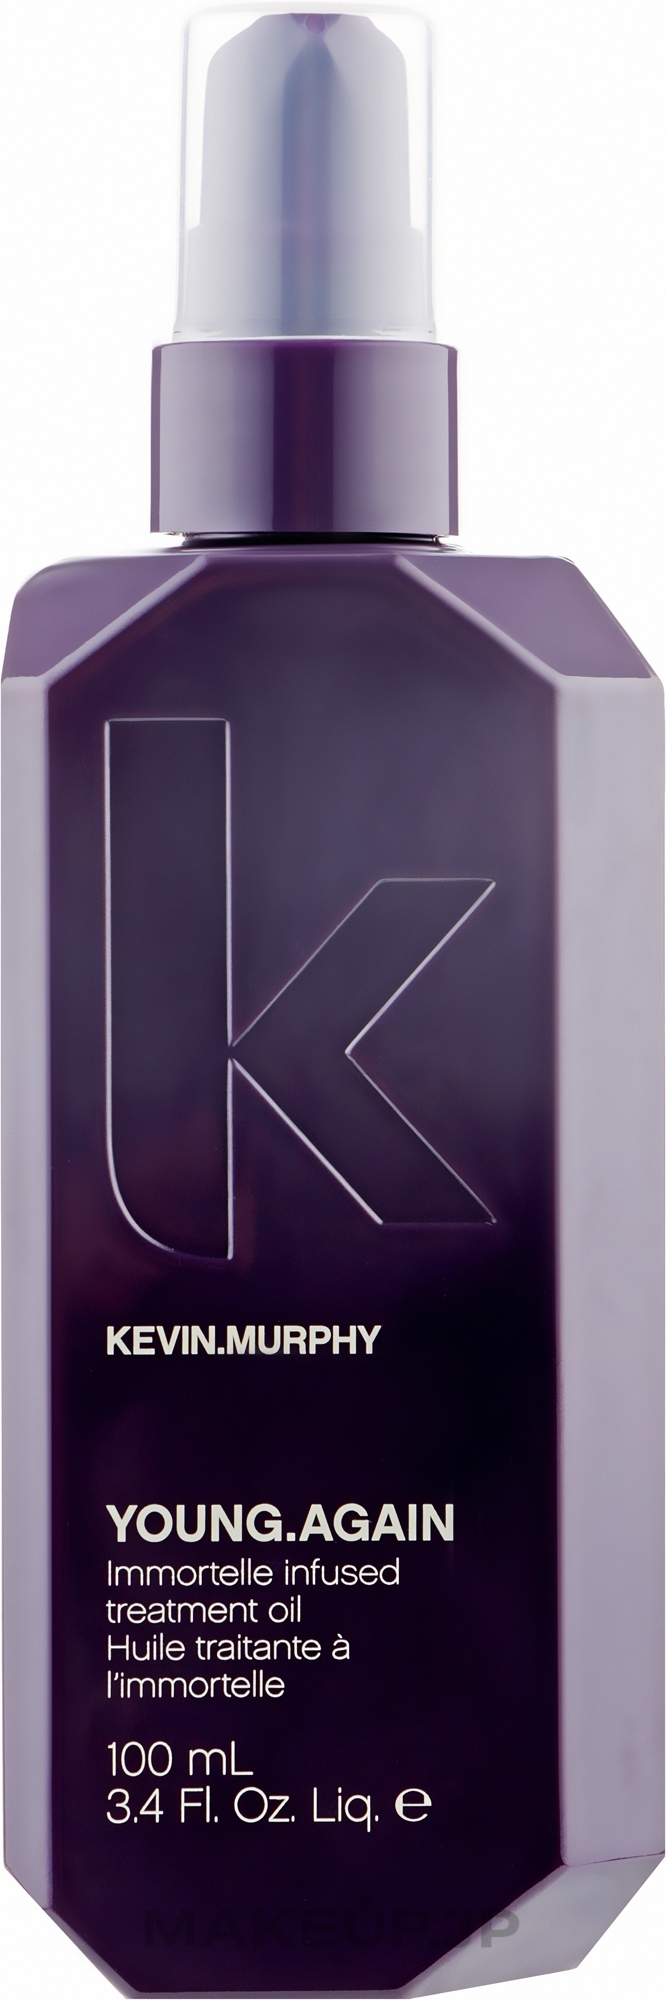 Strengthening Long Hair Oil - Kevin.Murphy Young.Again Oil Treatment — photo 100 ml